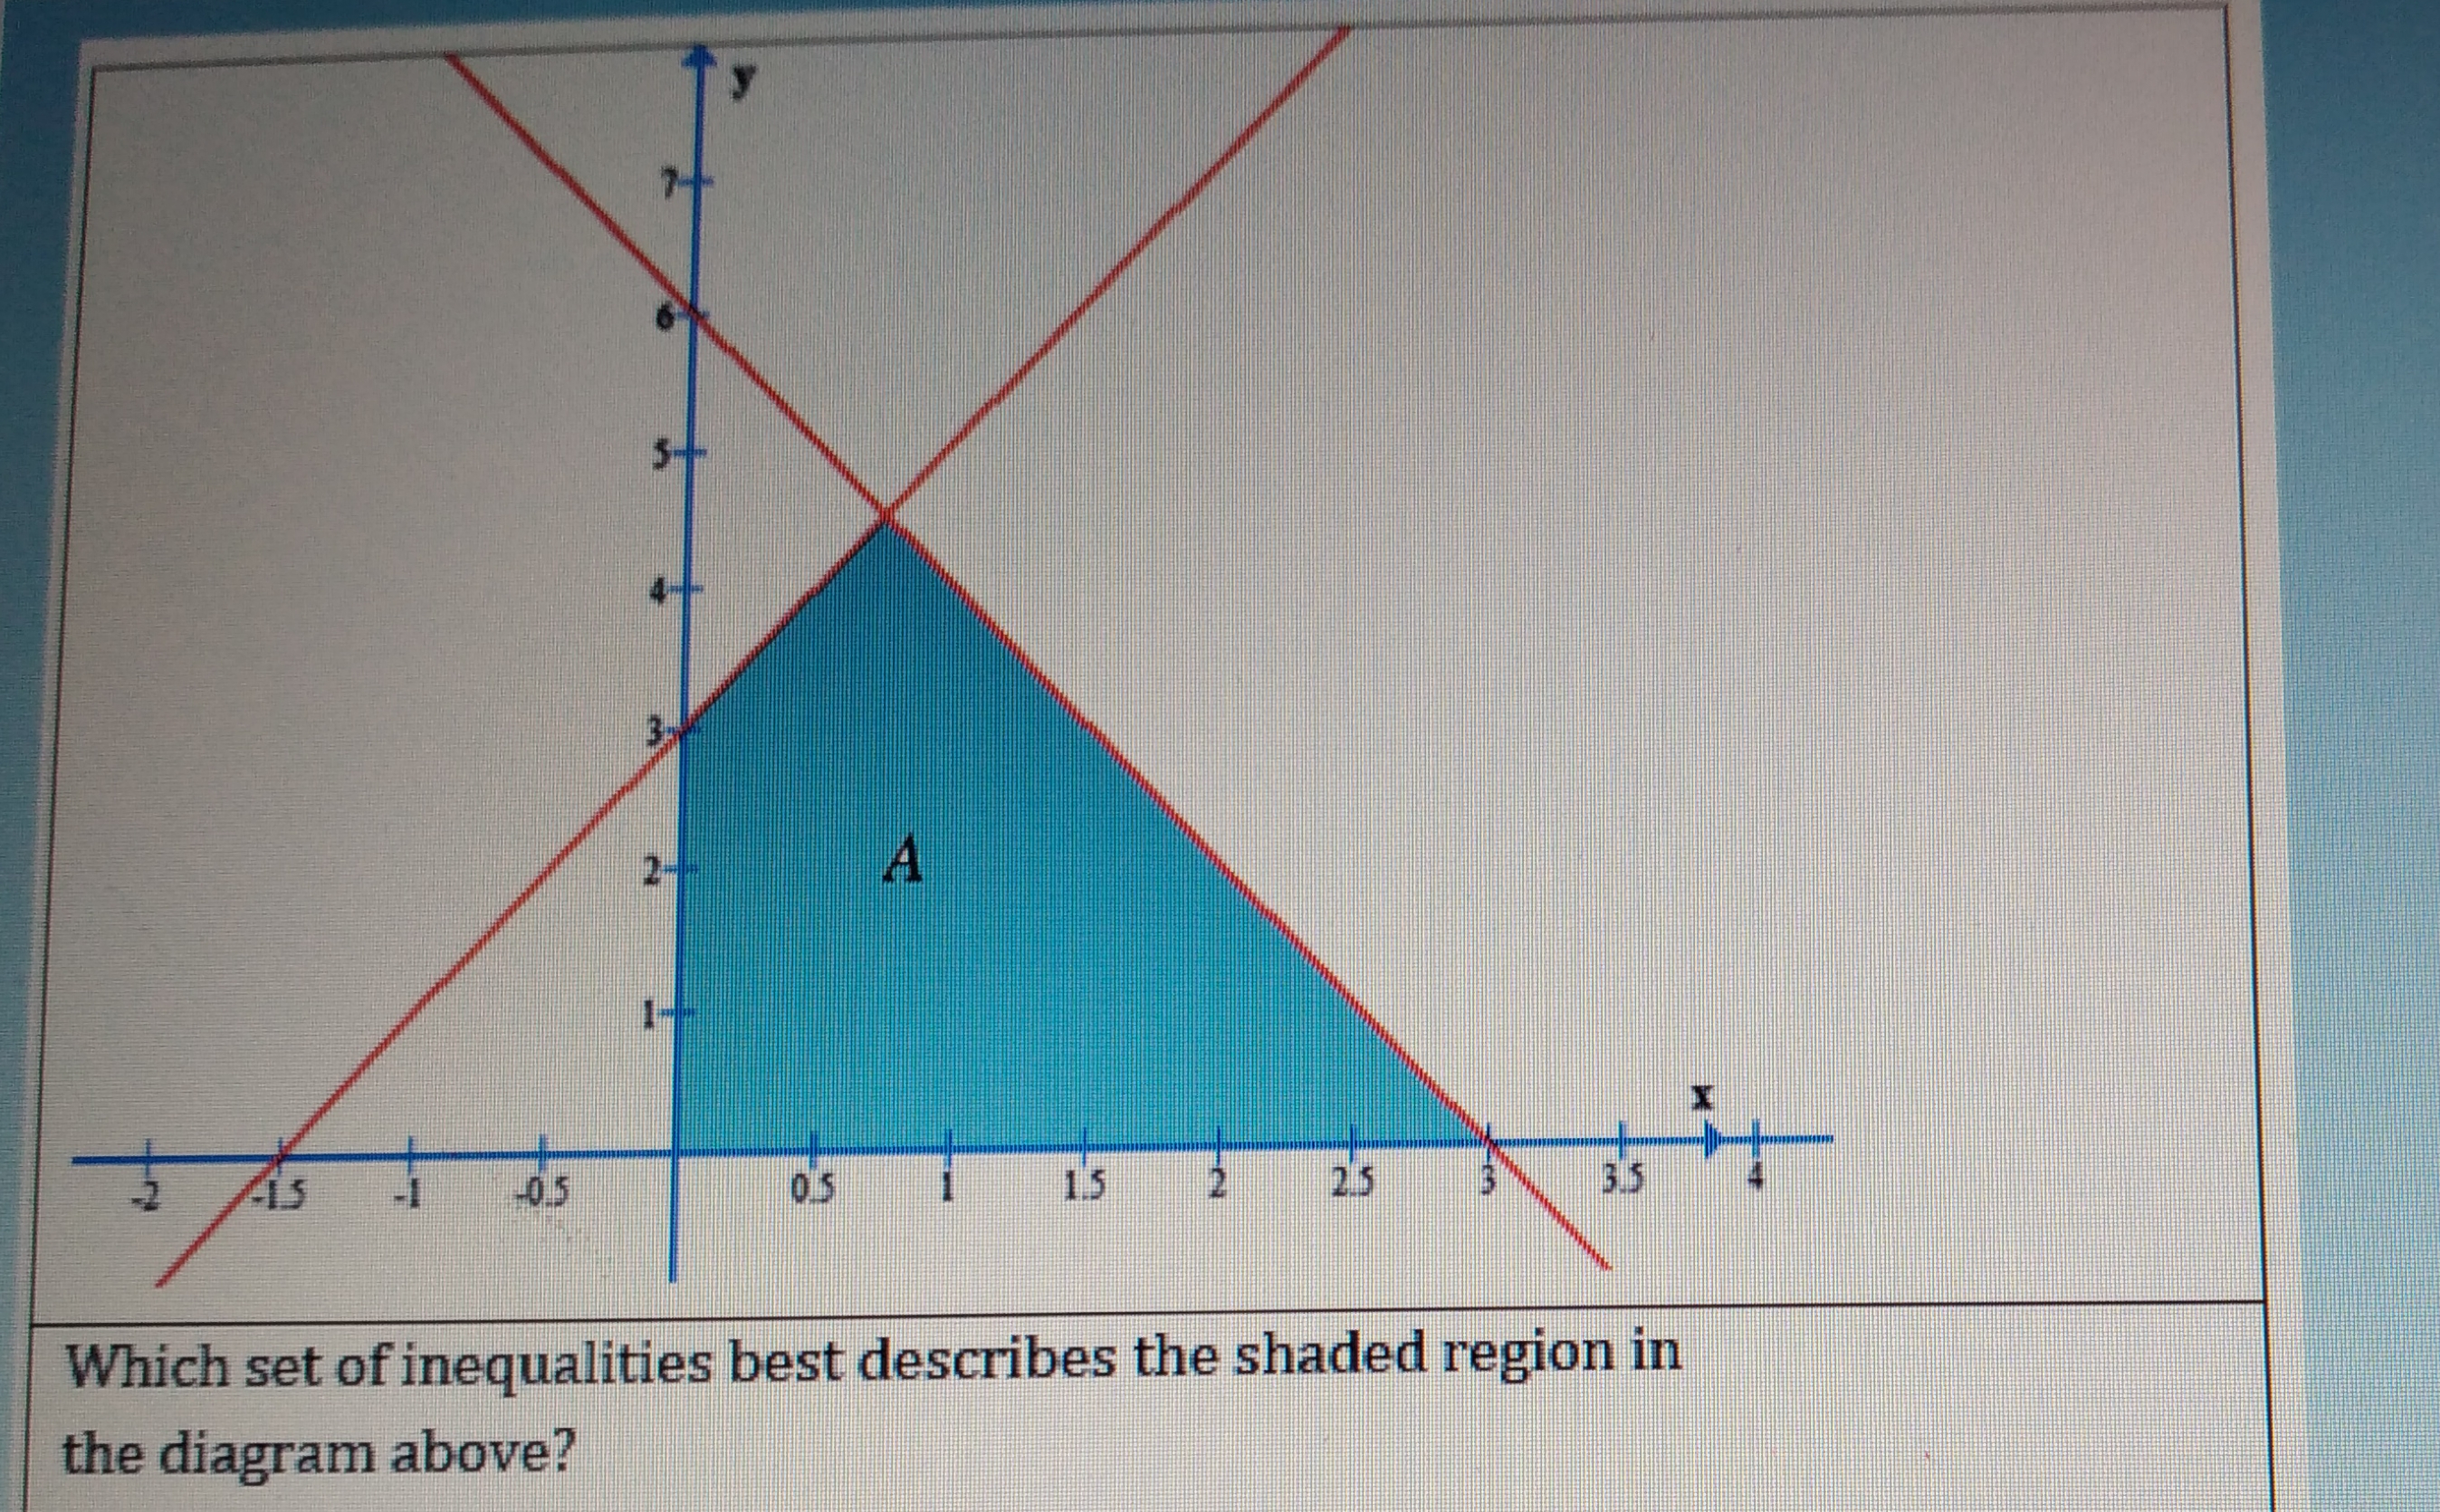 3,
2-
05
05
1.5
25
3.5
Which set of inequalities best describes the shaded region in
the diagram above?
